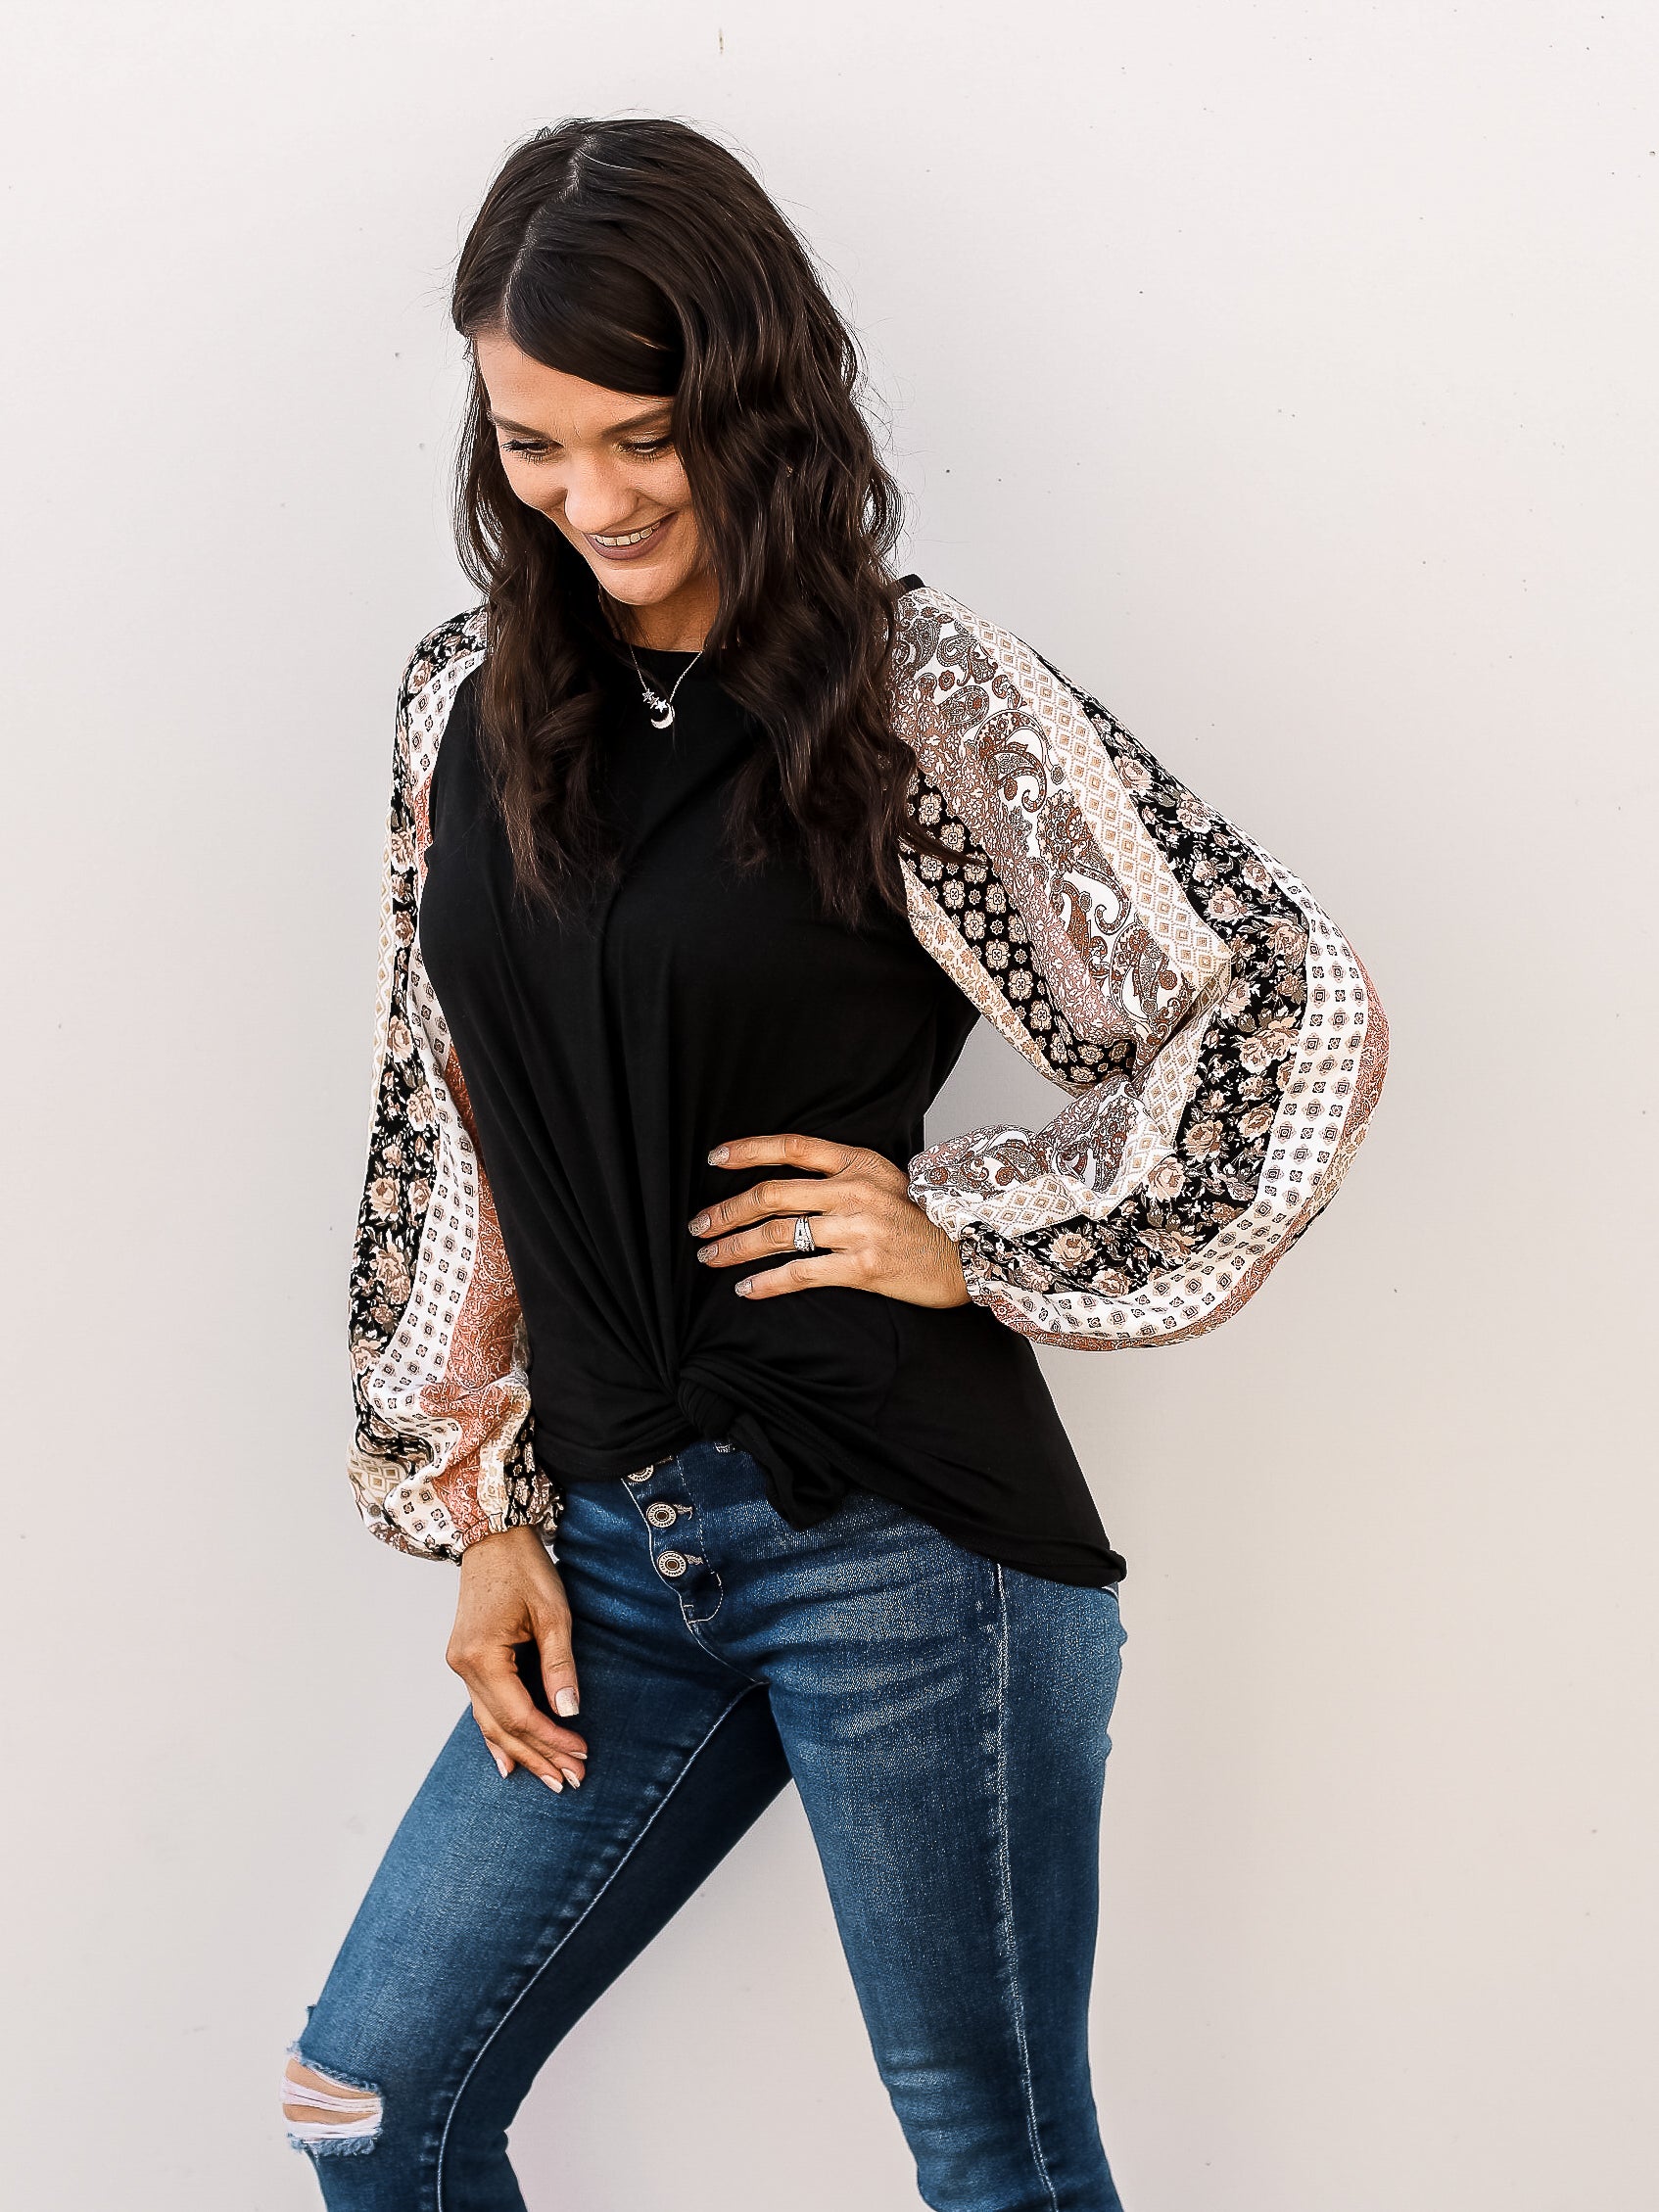 Black top with mixed patterned sleeves in floral and paisley prints.